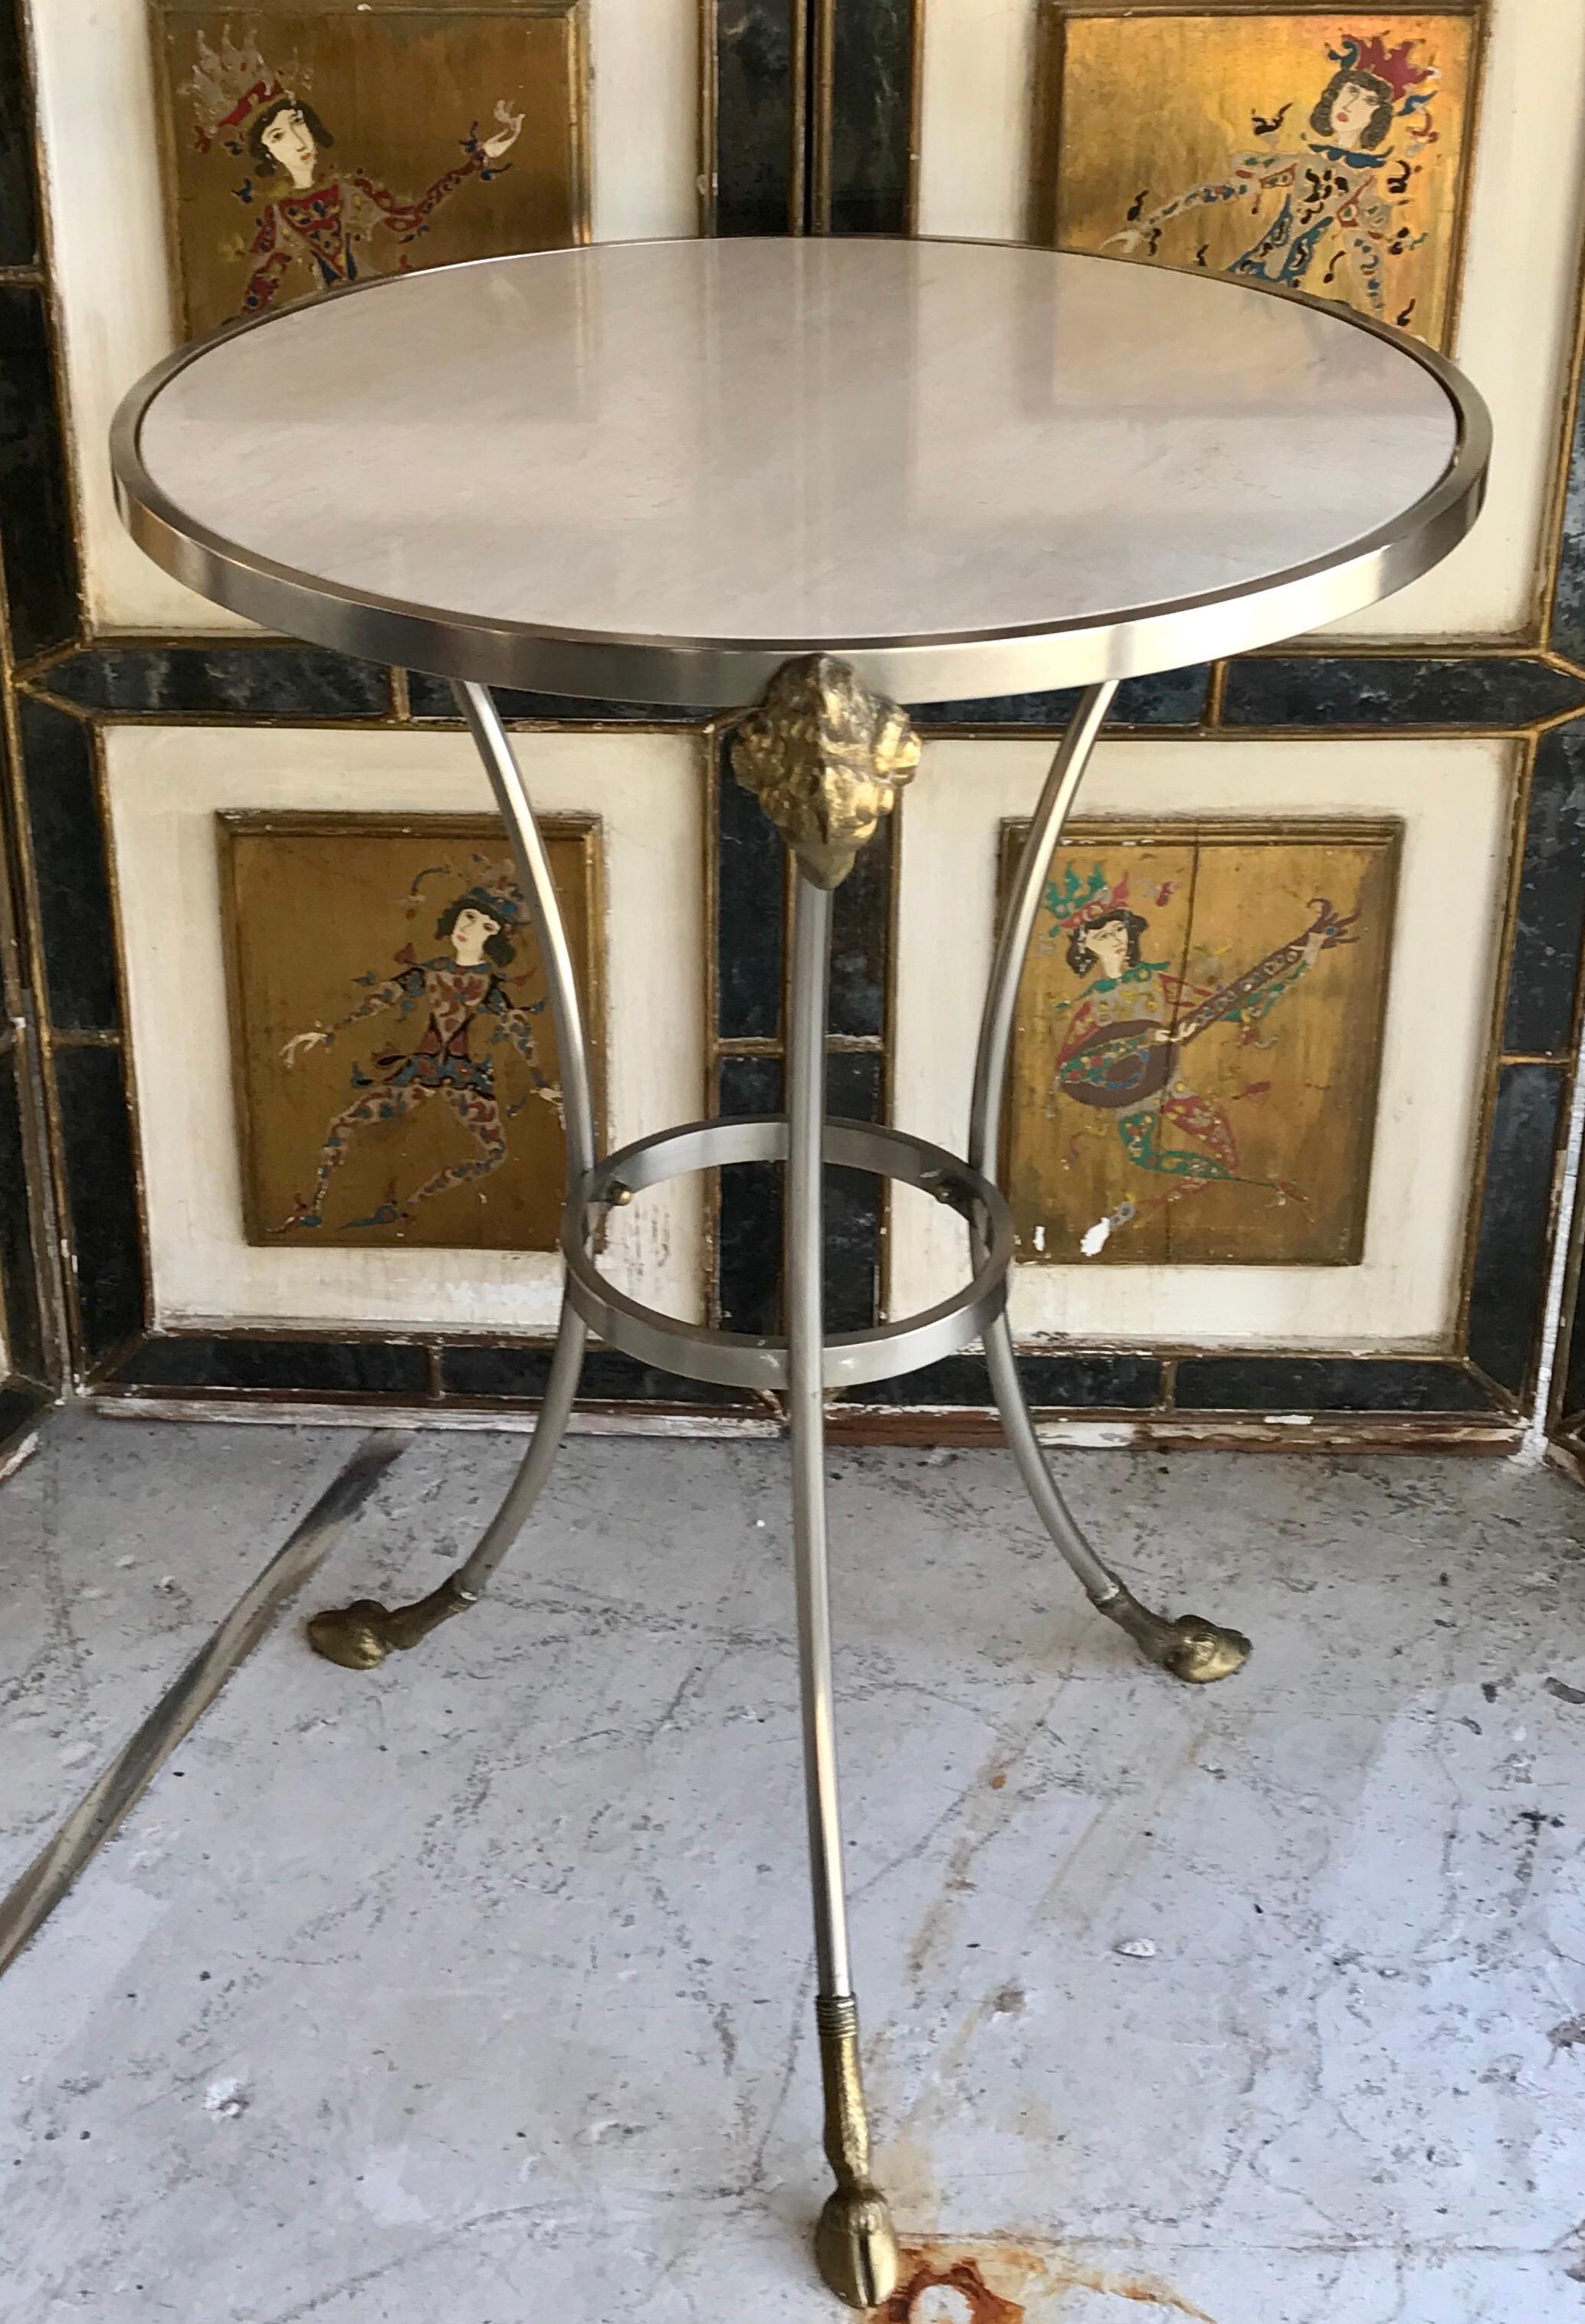 Pair of stunning Maison Jansen brass and brushed nickel Ram’s head and hooves gueridons with natural white travertine table tops.